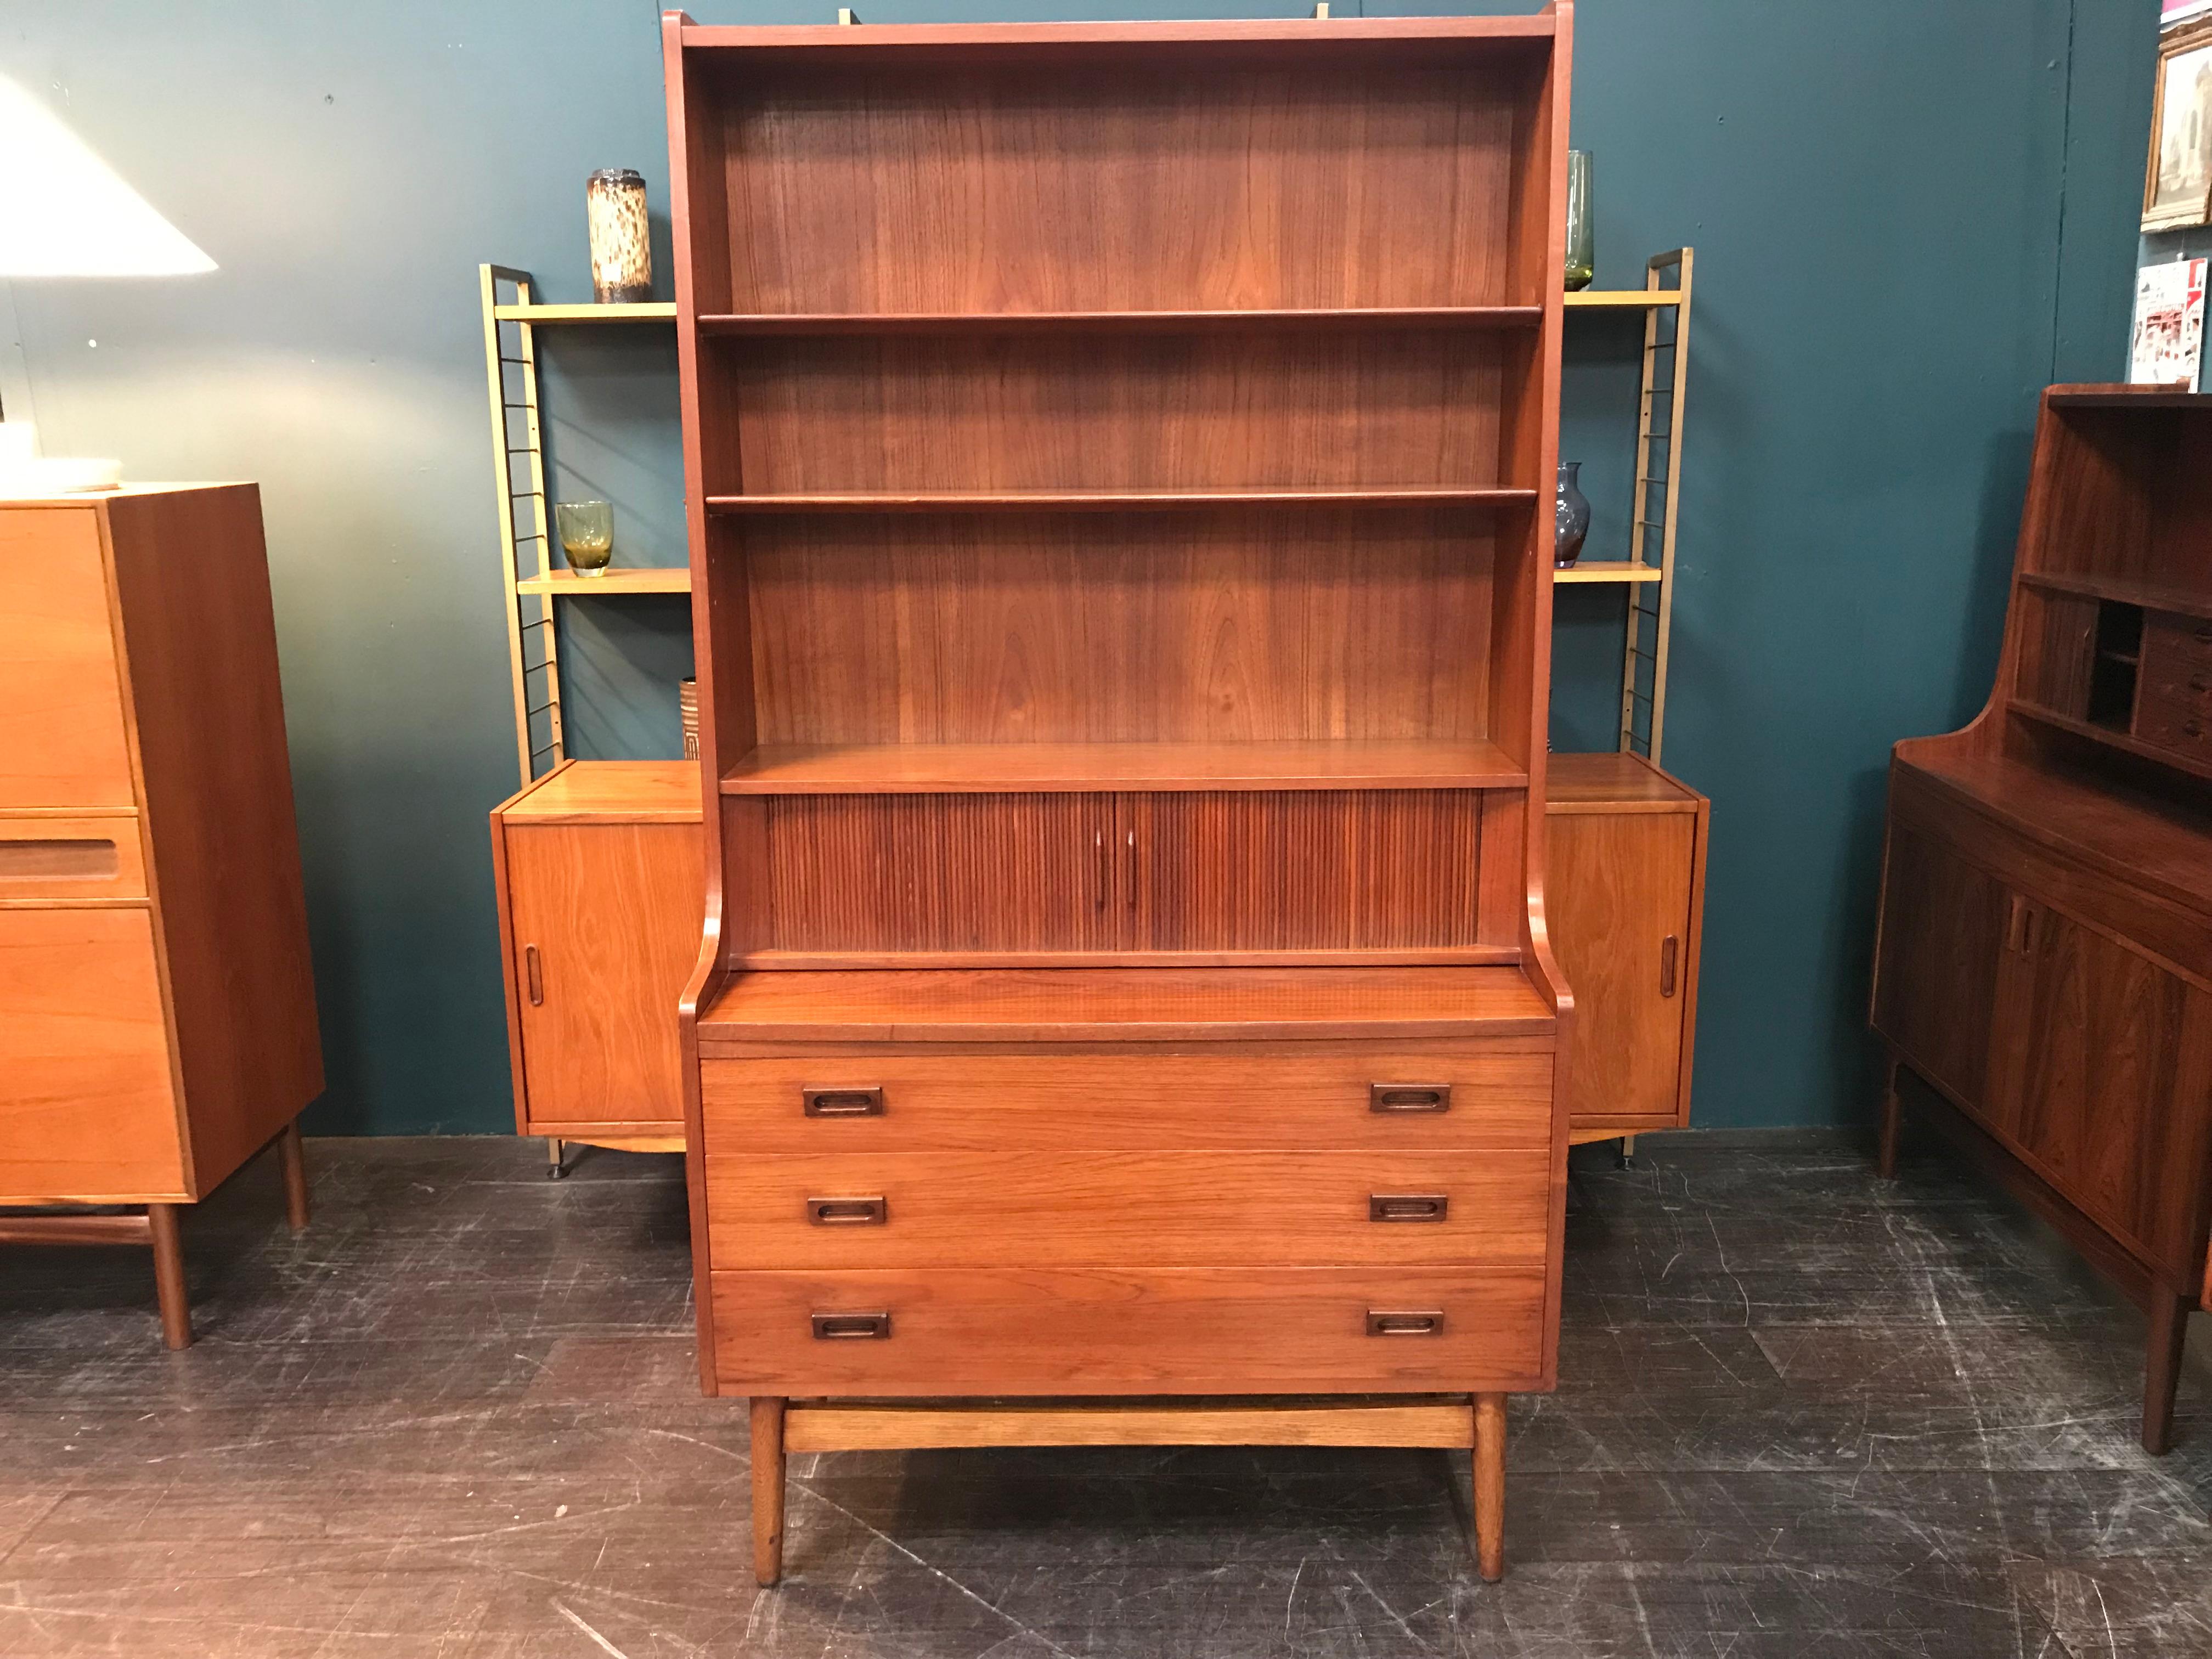 This stunning teak desk is an elegant offering from one of Denmark’s finest furniture makers. This high secretaire was designed in the 1960s by Johannes Sorth. It features three large drawers, a pull-out desktop above the drawers (with a depth of